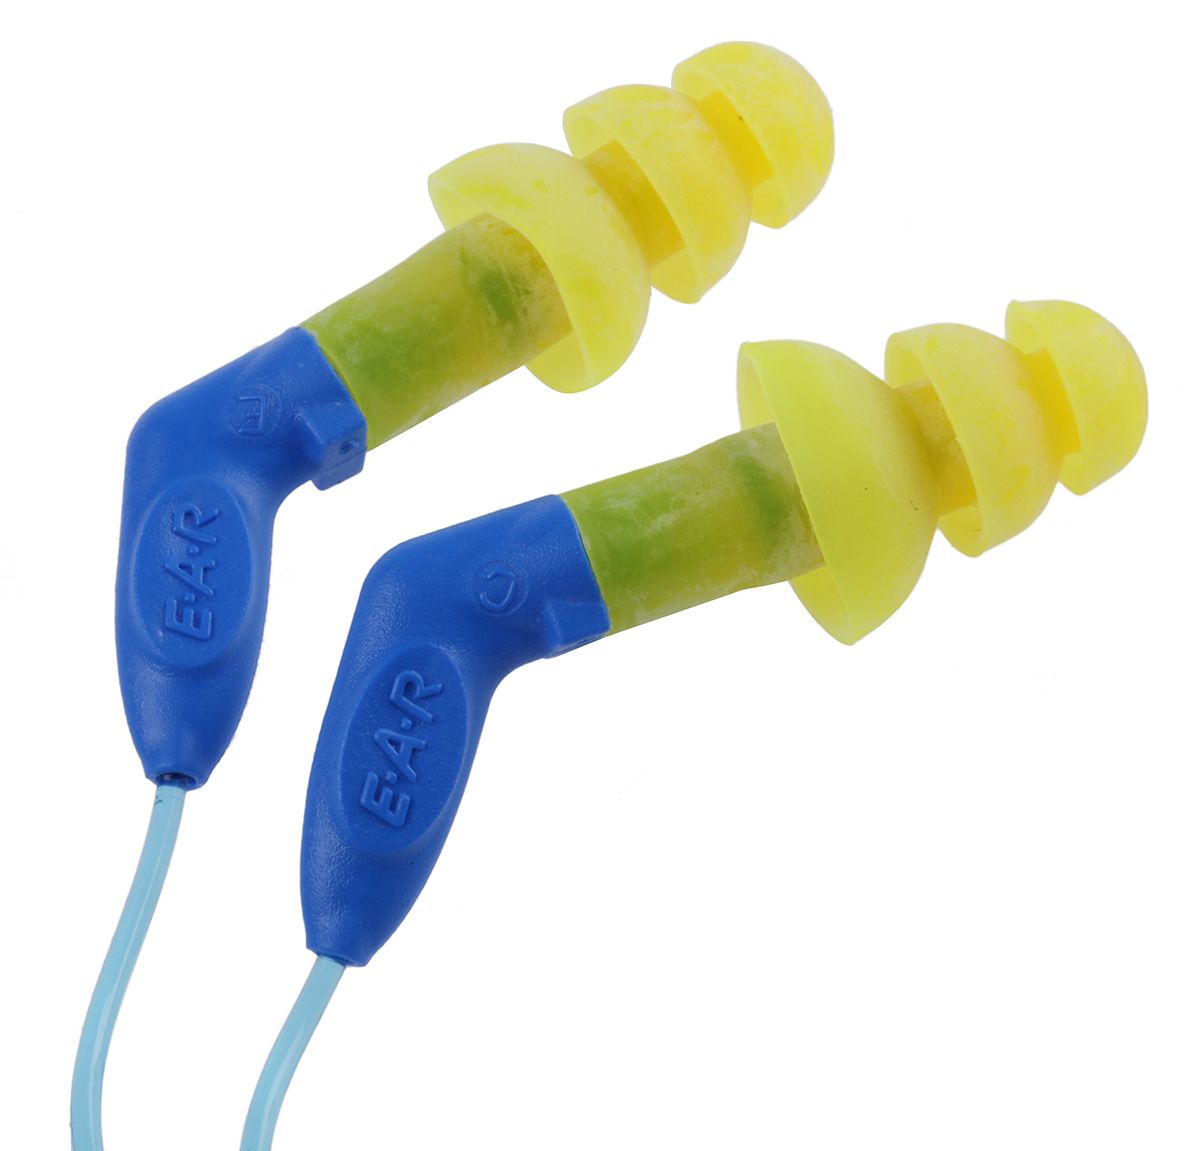 3M E.A.R Ultrafit X Series Yellow Reusable Corded Ear Plugs, 35dB Rated, 50 Pairs